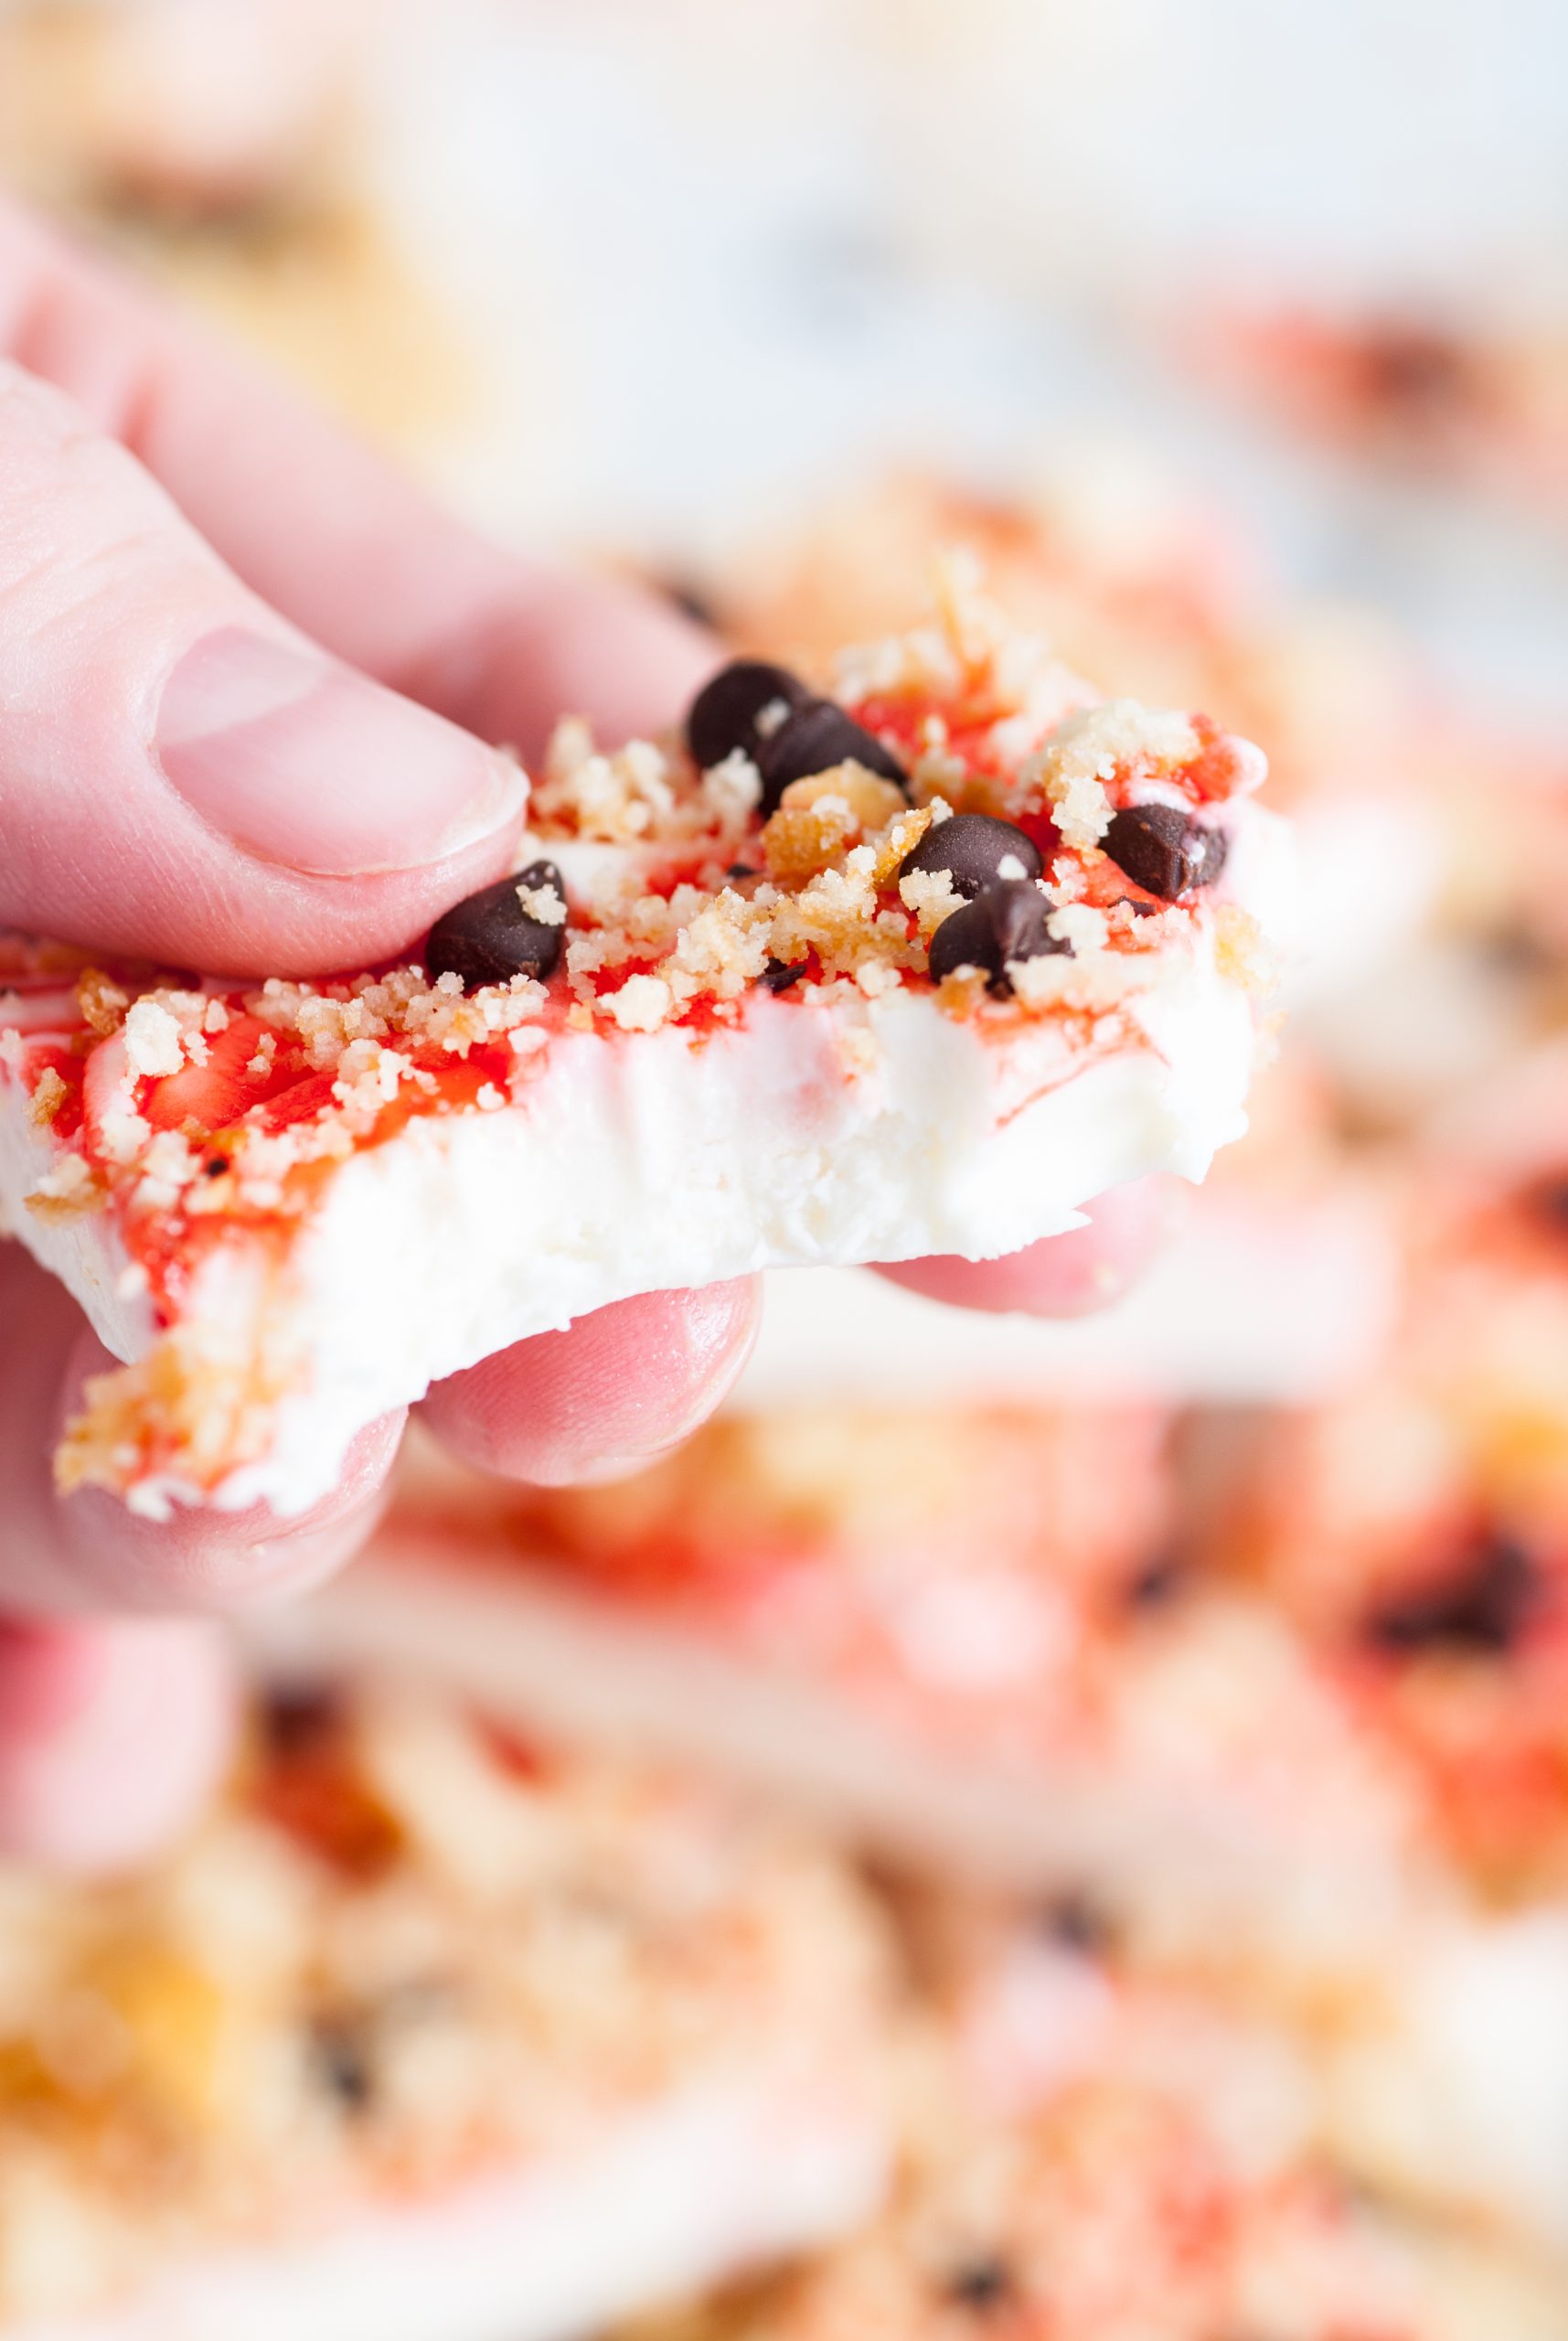 Hand holding a partially eaten piece of colorful yogurt bark topped with granola and chocolate chips.